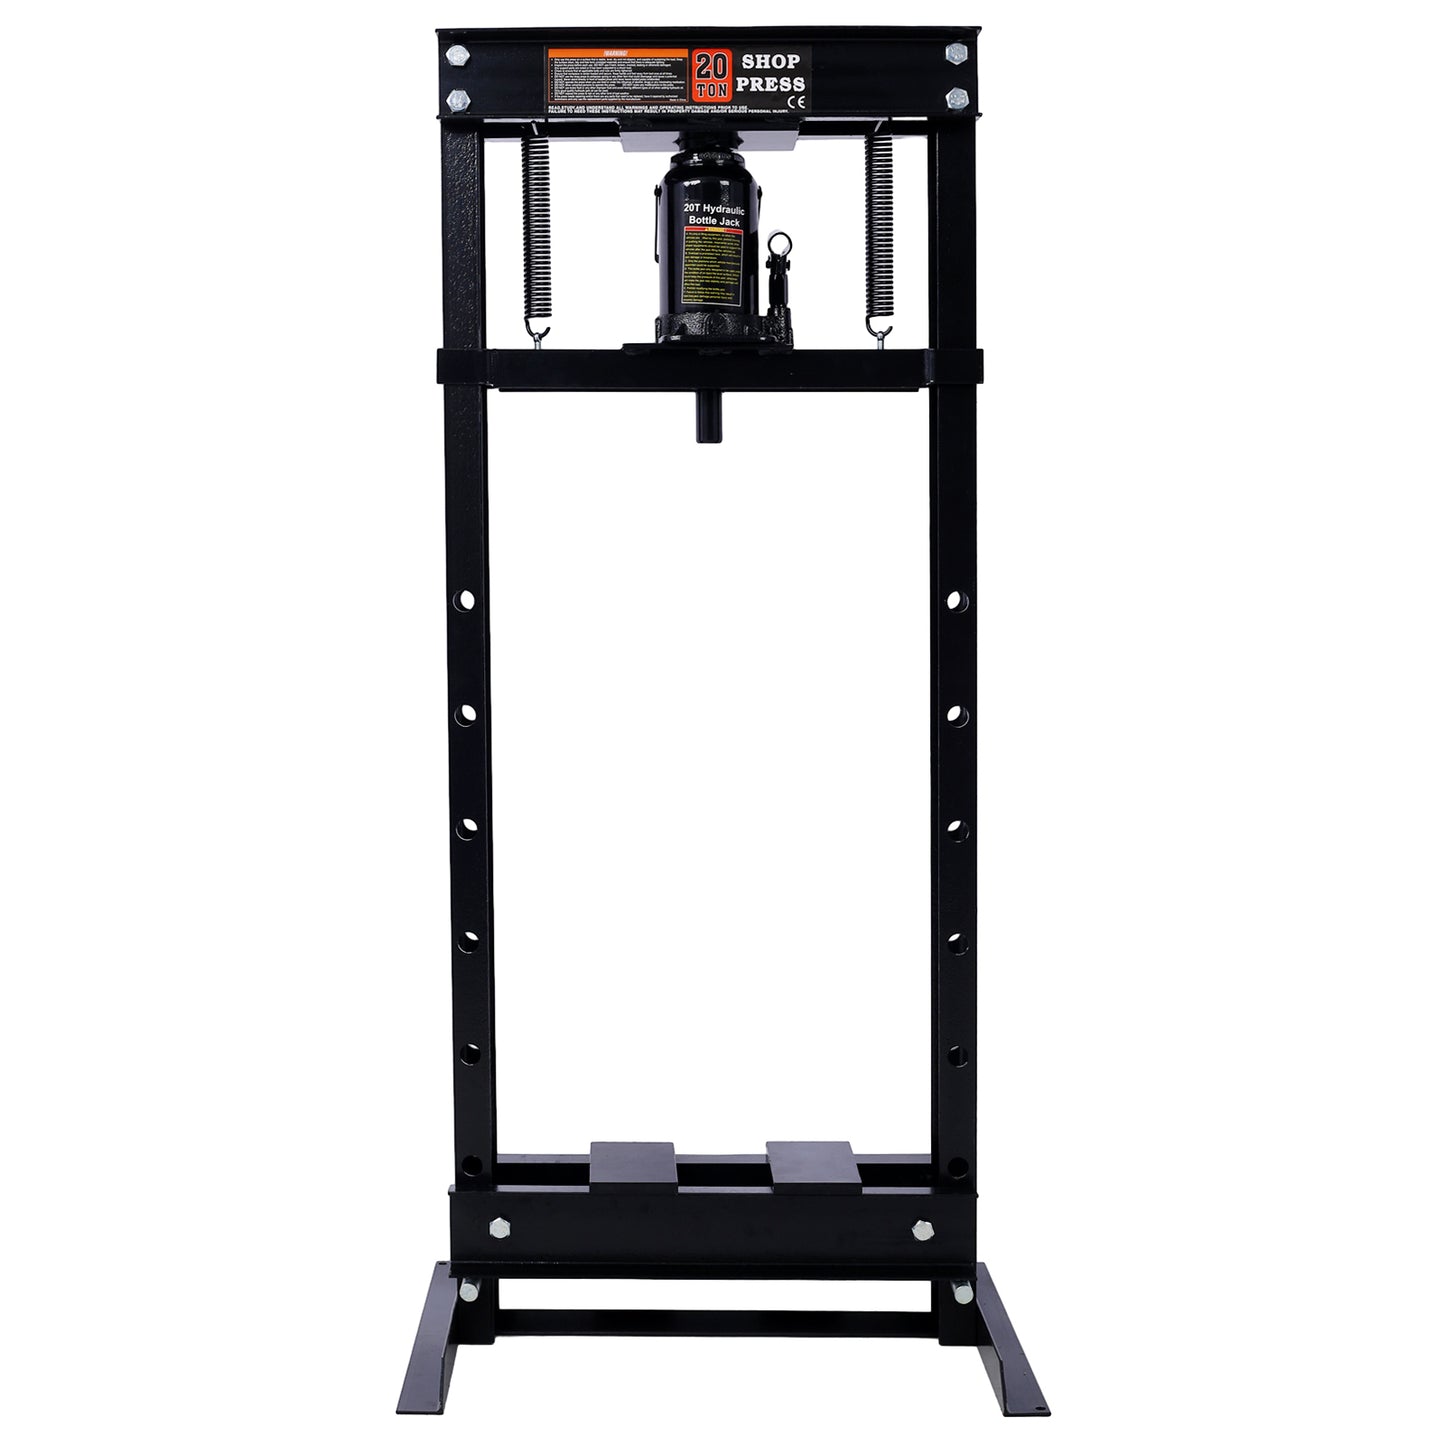 20 Ton Bottle Jack Shop Press, Bend, Straighten, or Press Parts, Install Bearings, U-Joints, Bushings, Ball Joints, and Pulleys,black